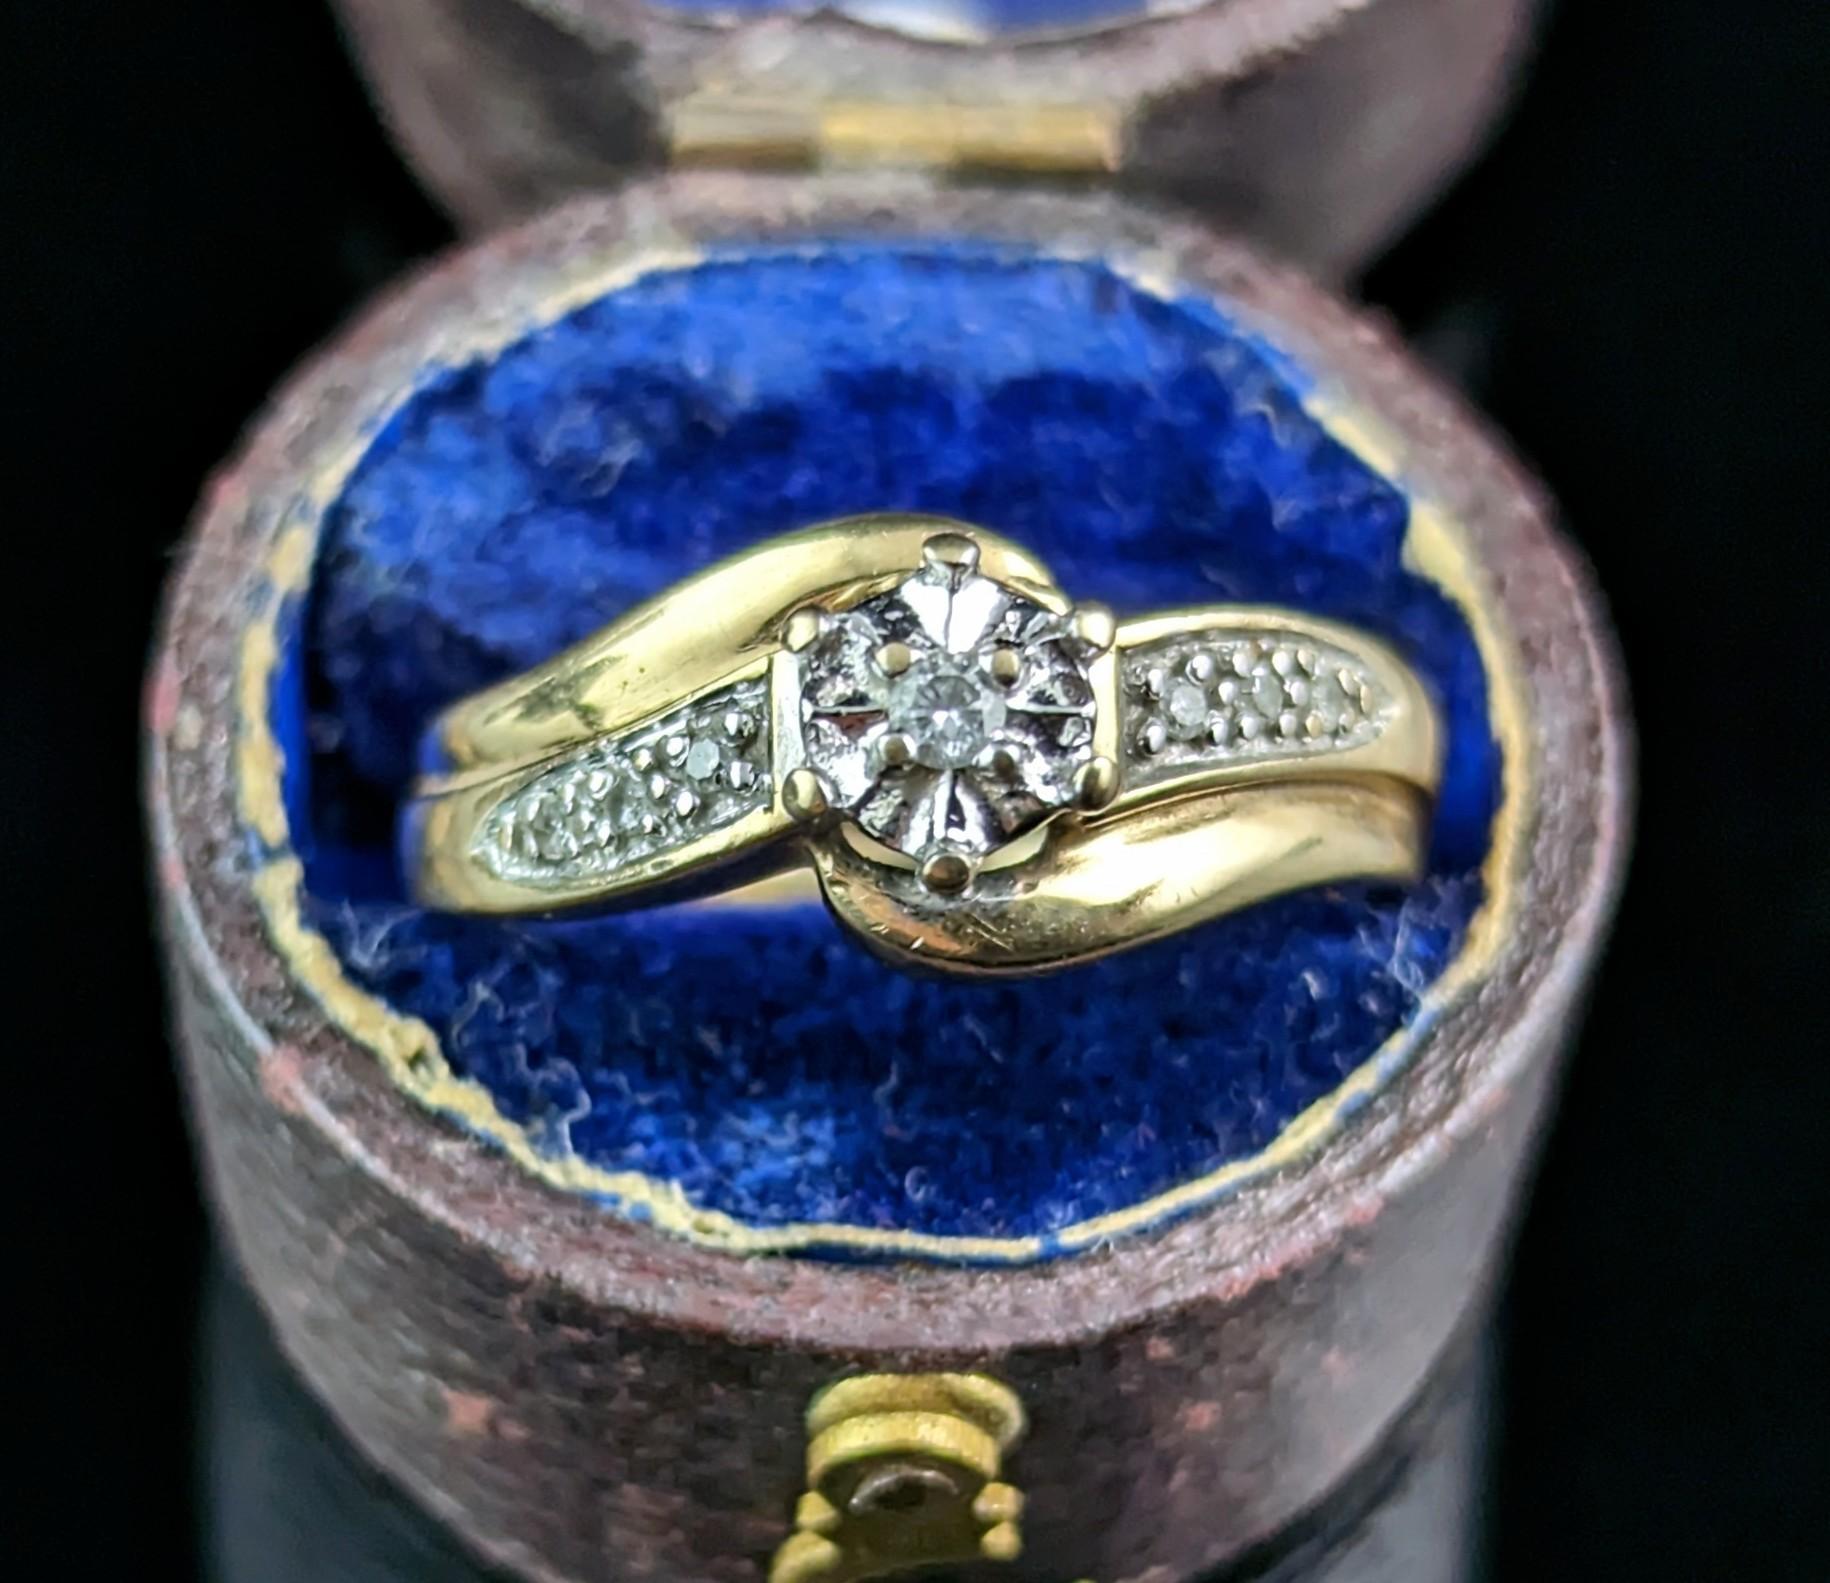 A pretty vintage Diamond Crossover ring in 9ct yellow gold.

A chunky 9ct gold band with a cross over design face and shoulders, the shoulders are set with diamond chips and the front houses a single diamond in a 9ct white gold illusion setting.

It